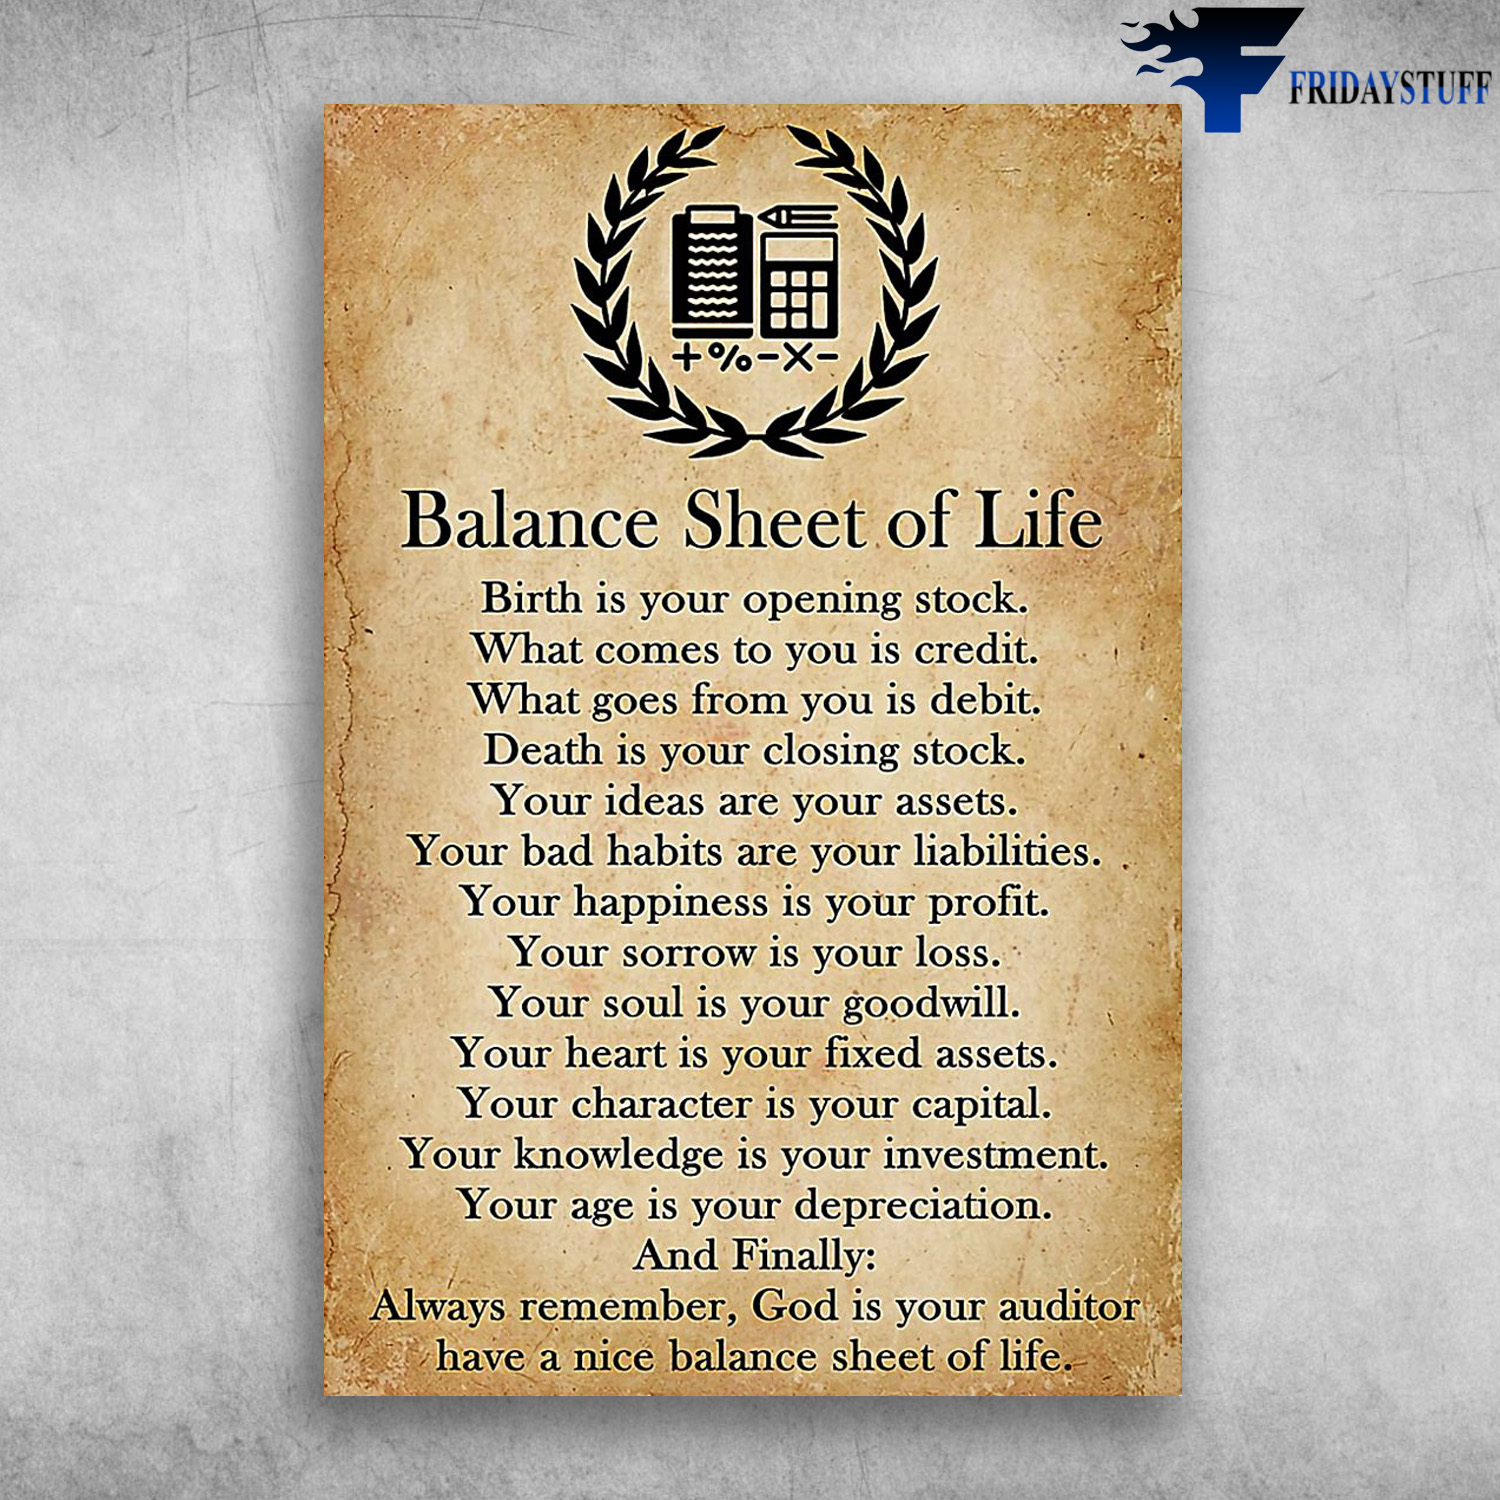 Balance Sheet Of Life - Birth Is Your Opening Stock, What Comes To You Is Credit, What Goes From You Is Debit, Death Is Your Closing Stock, Your Ideas Are Your Assets, Your Bad Habits Are Your Liabilities, Your Happiness Is Your Propit